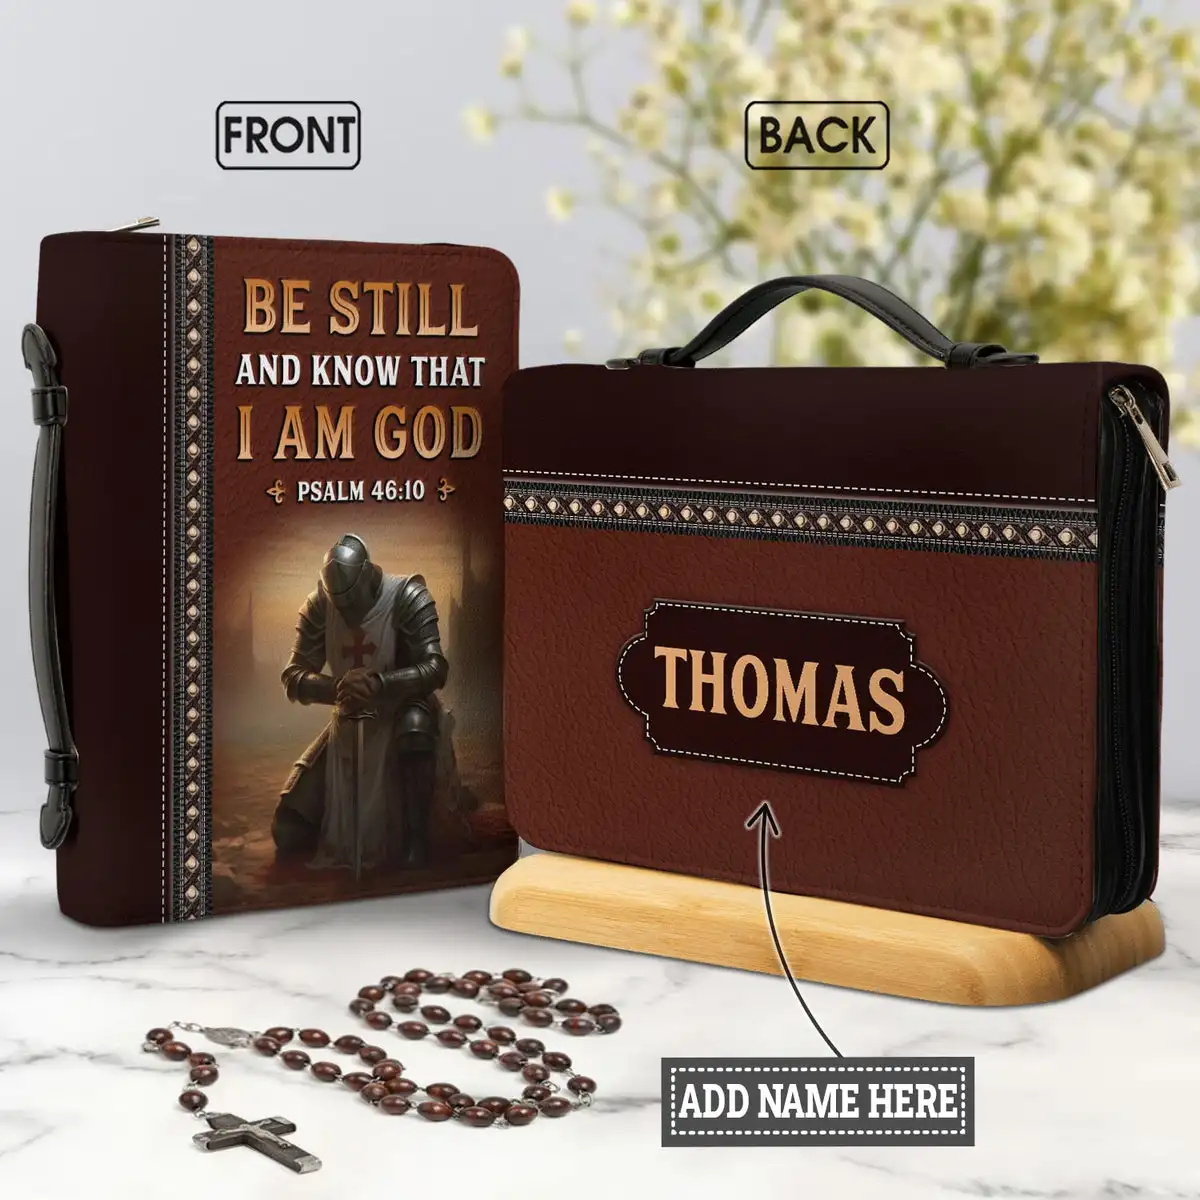 

Women's Handbag Leather Zipper Handle Bible Carrying Case Be Still And Know That I Am God Bible Bag Practical Book Storage Bags